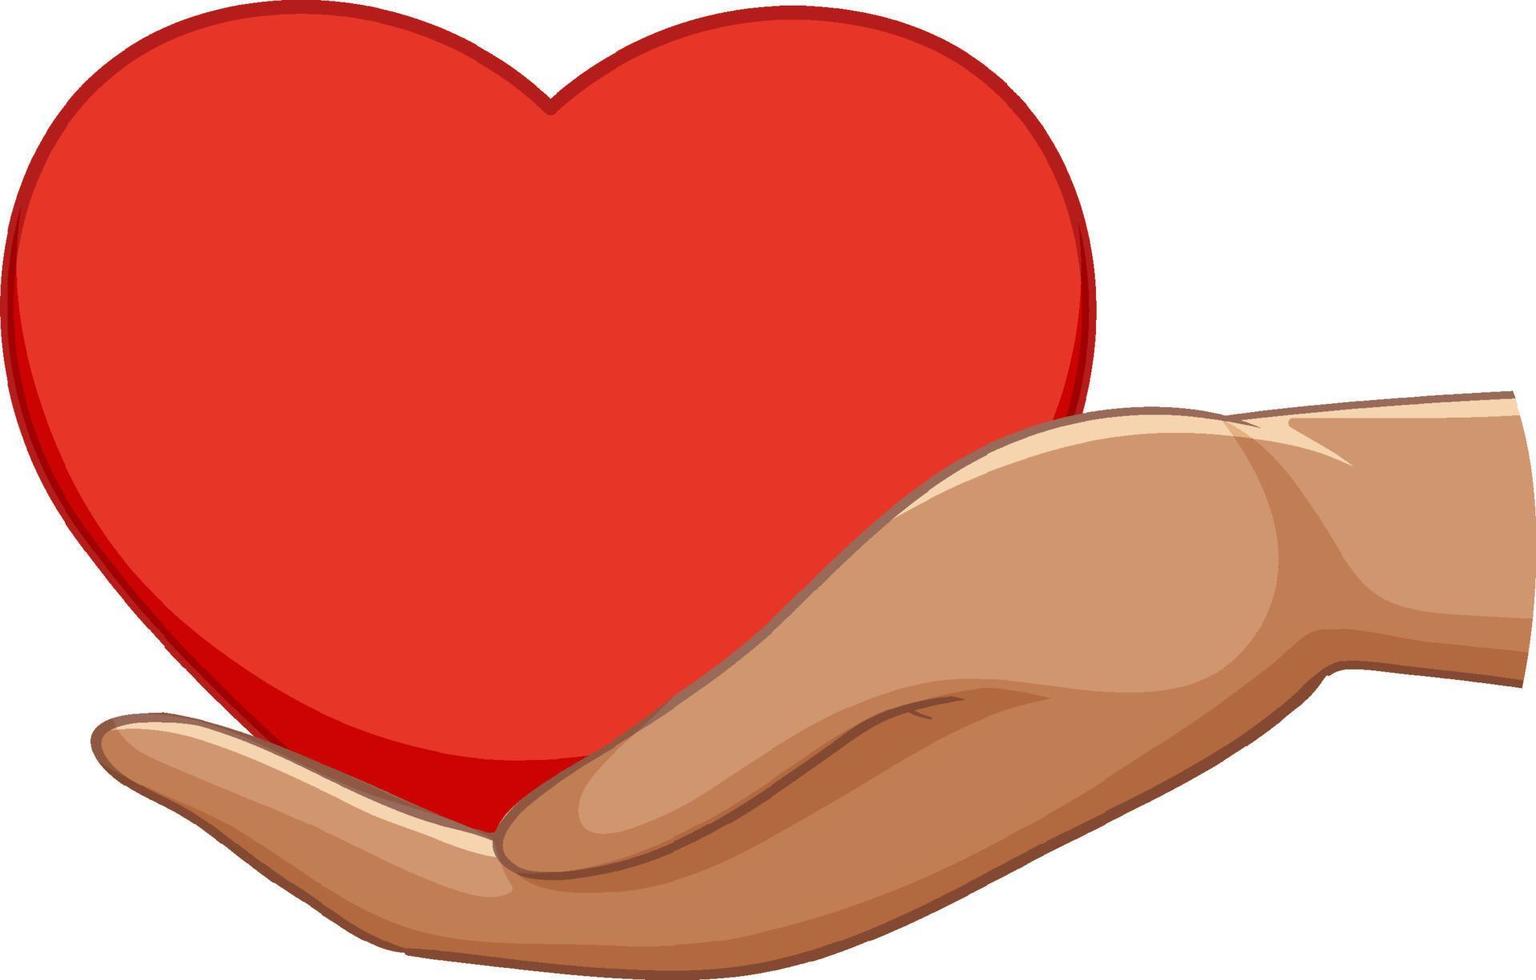 Red heart on hand vector